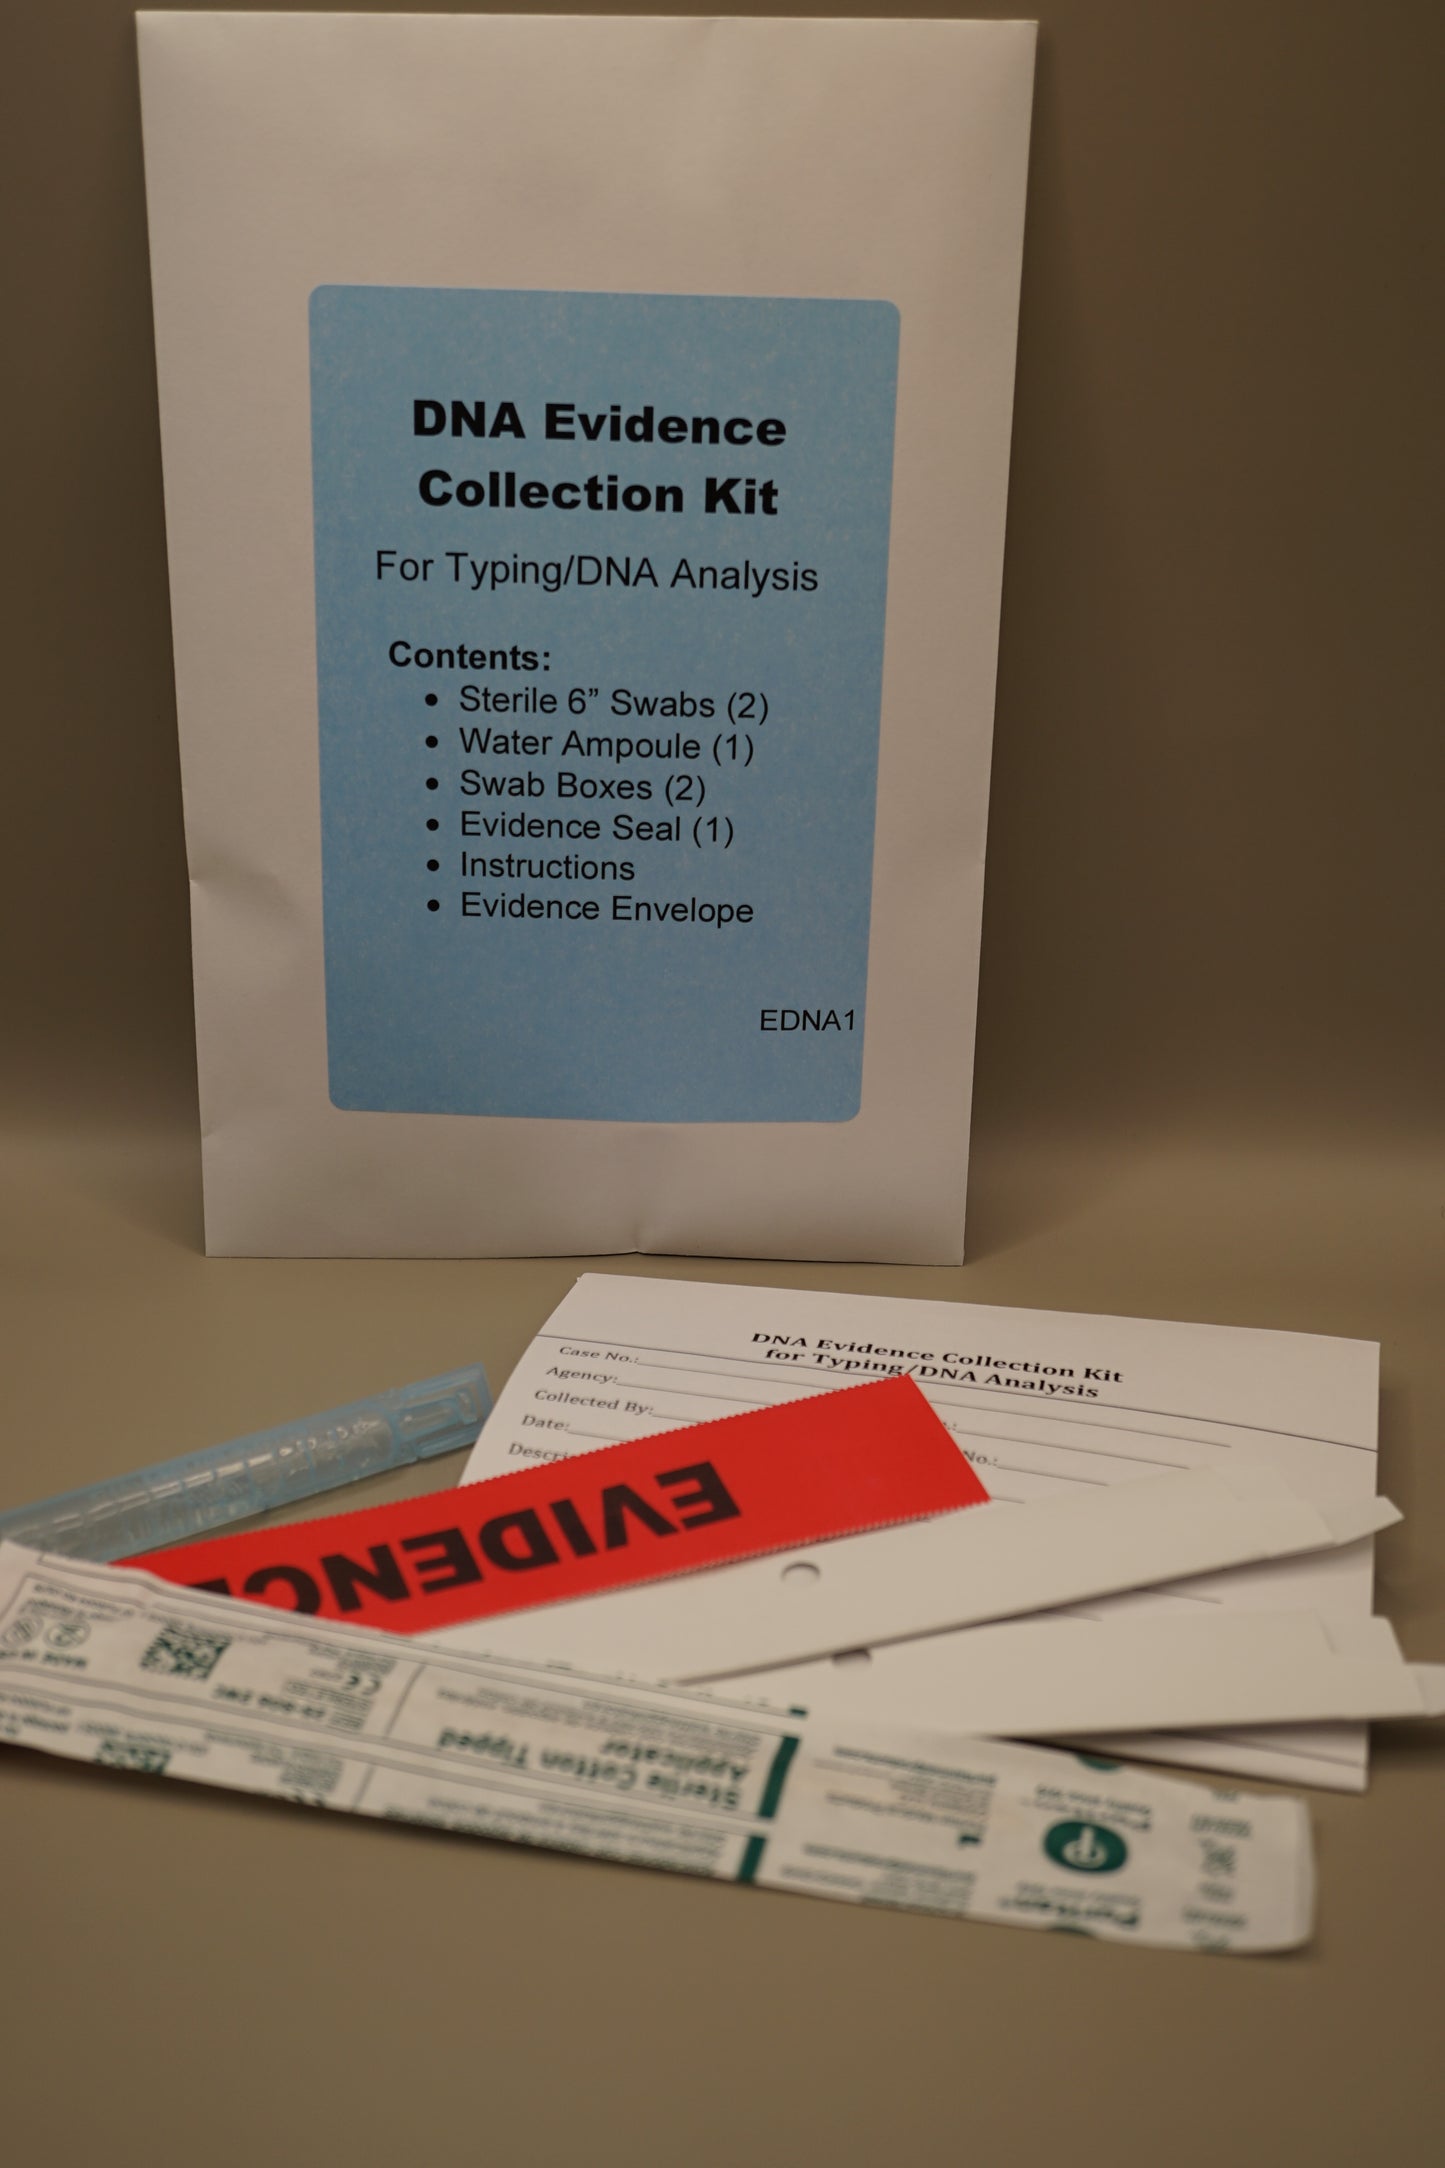 DNA Evidence Collection Kit for Typing/DNA Analysis